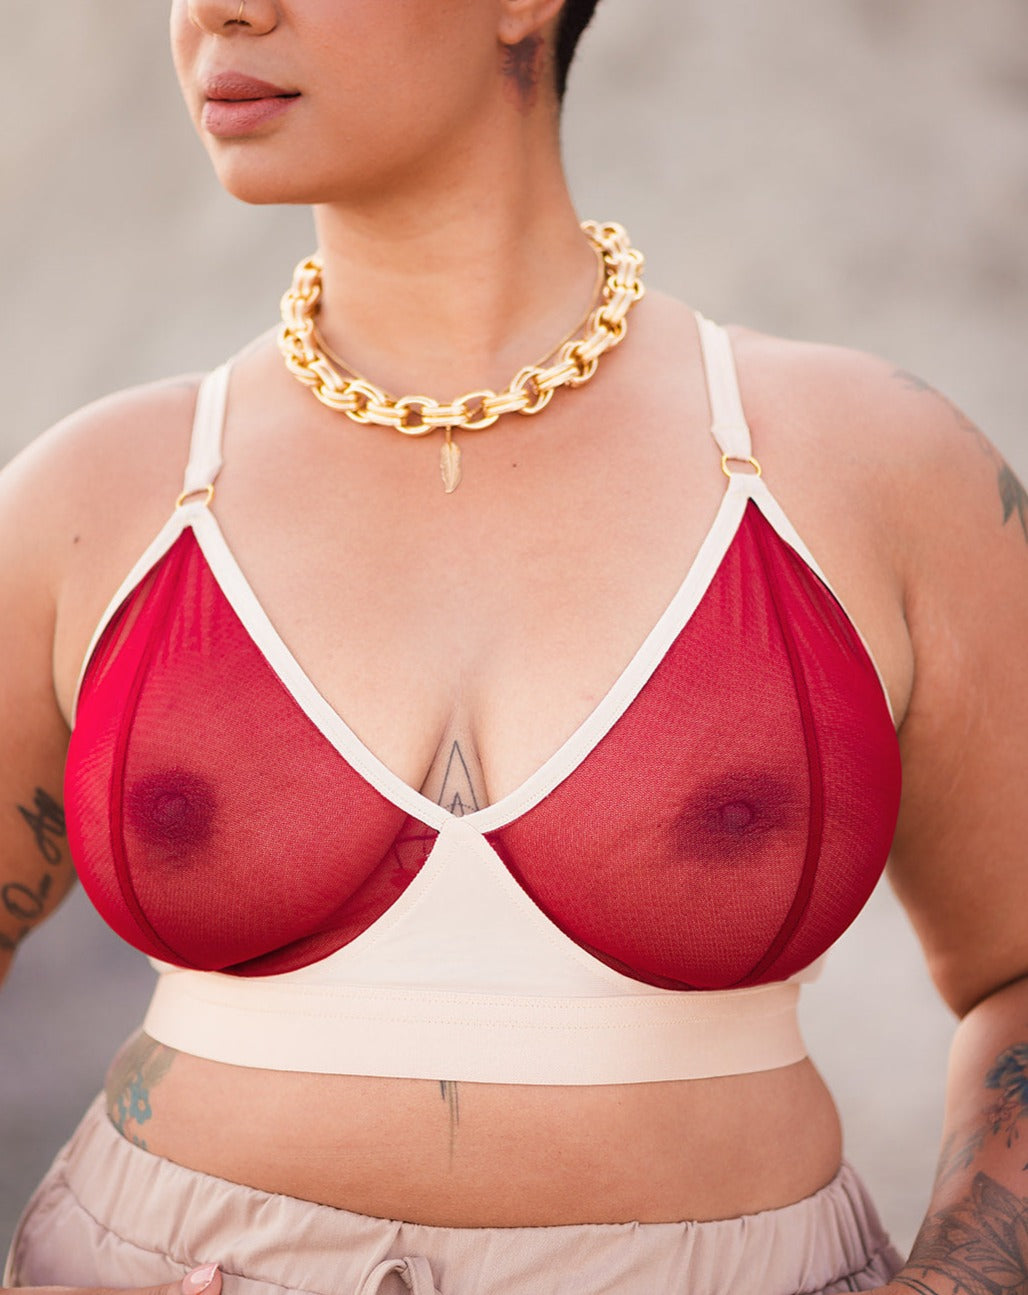 Rubies Bras female client and model wearing our Sahaara Sheers bra. Close up.